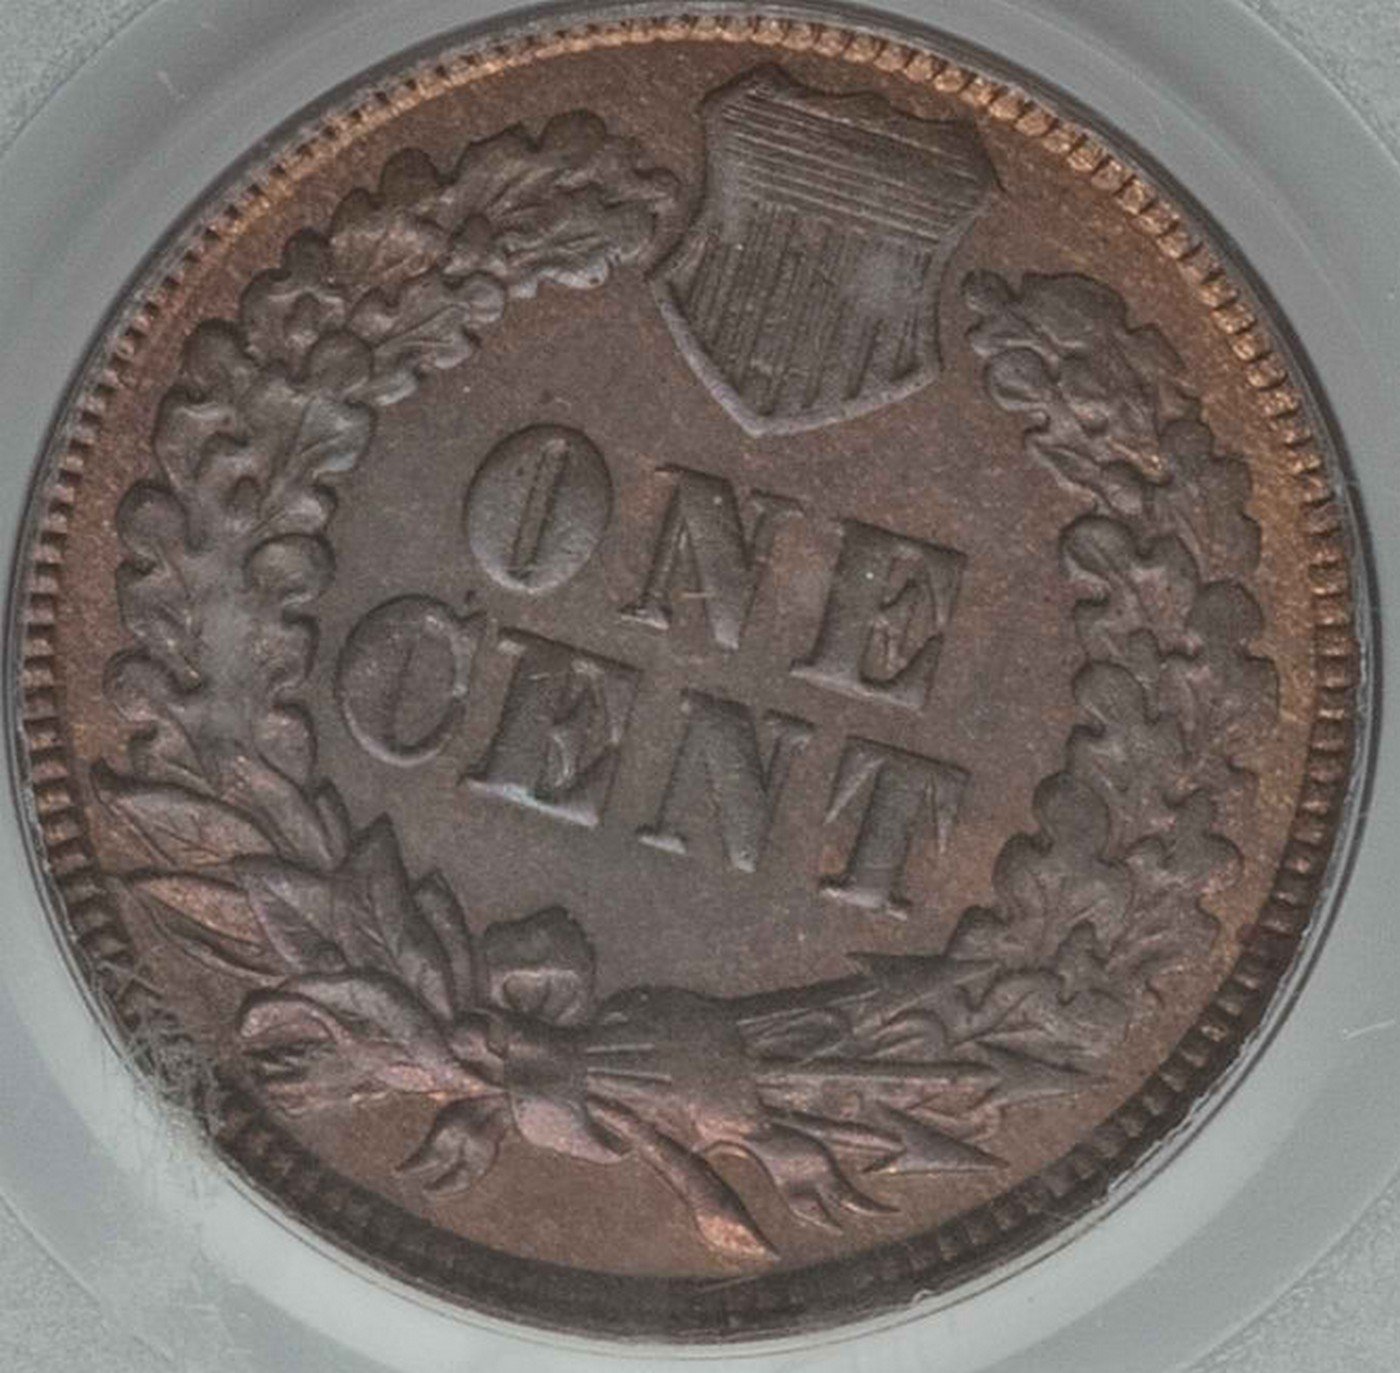 1870 DDR-008 Indian Head Penny - Photos courtesy of Heritage Auctions